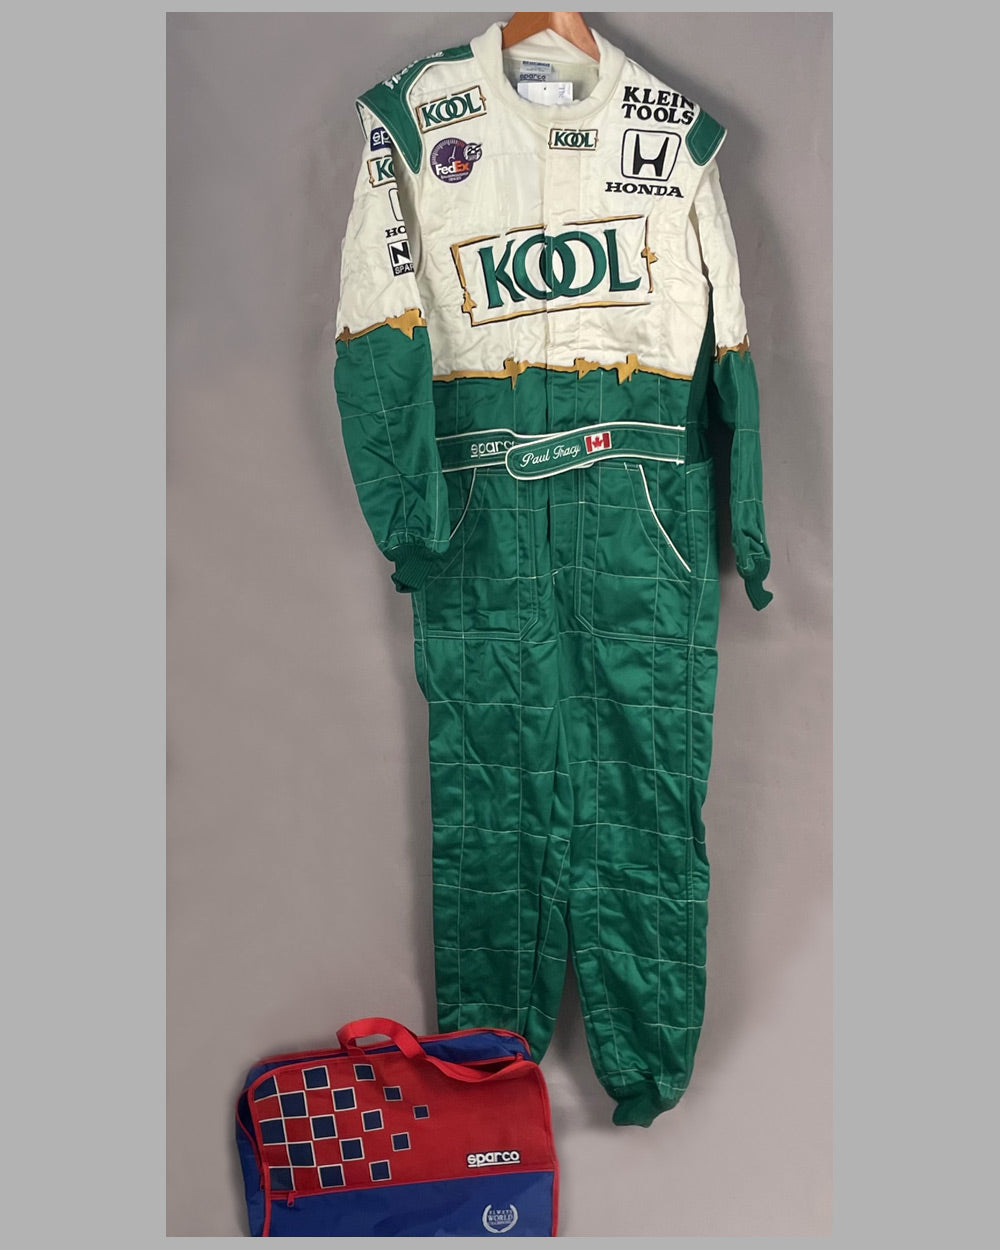 Paul Tracy Sparco racing suit presented to Herb Fishel by Tracy